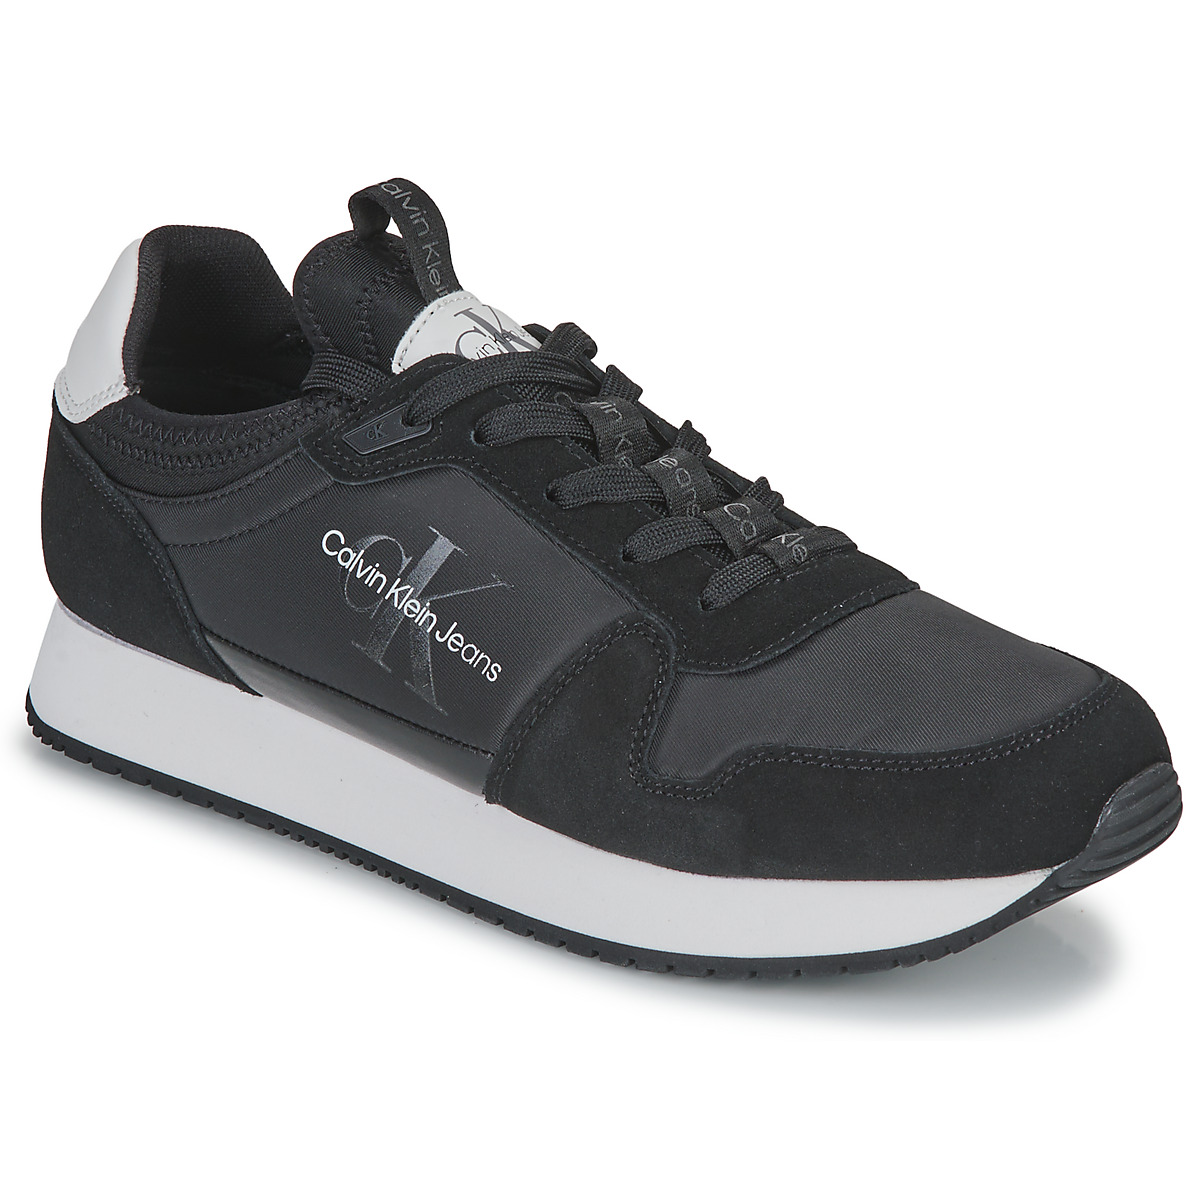 Chaussures Homme trainers calvin klein low top lace up neo hm0hm00286 navy sulphur RETRO RUNNER LACEUP REFL Noir